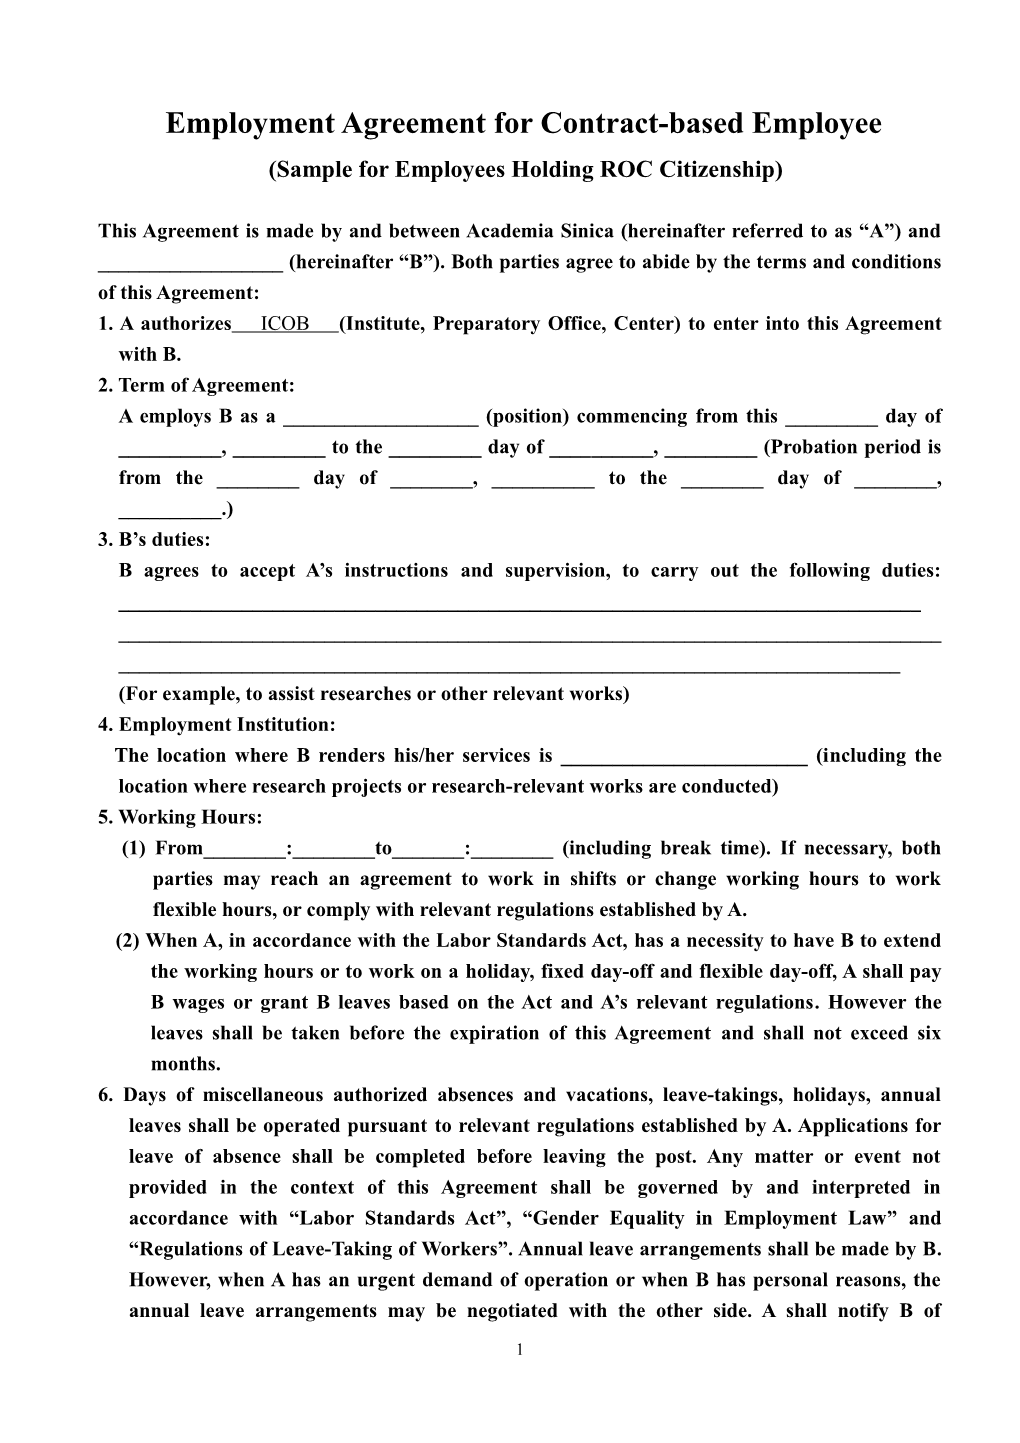 Employment Agreement for Contract-Based Employee